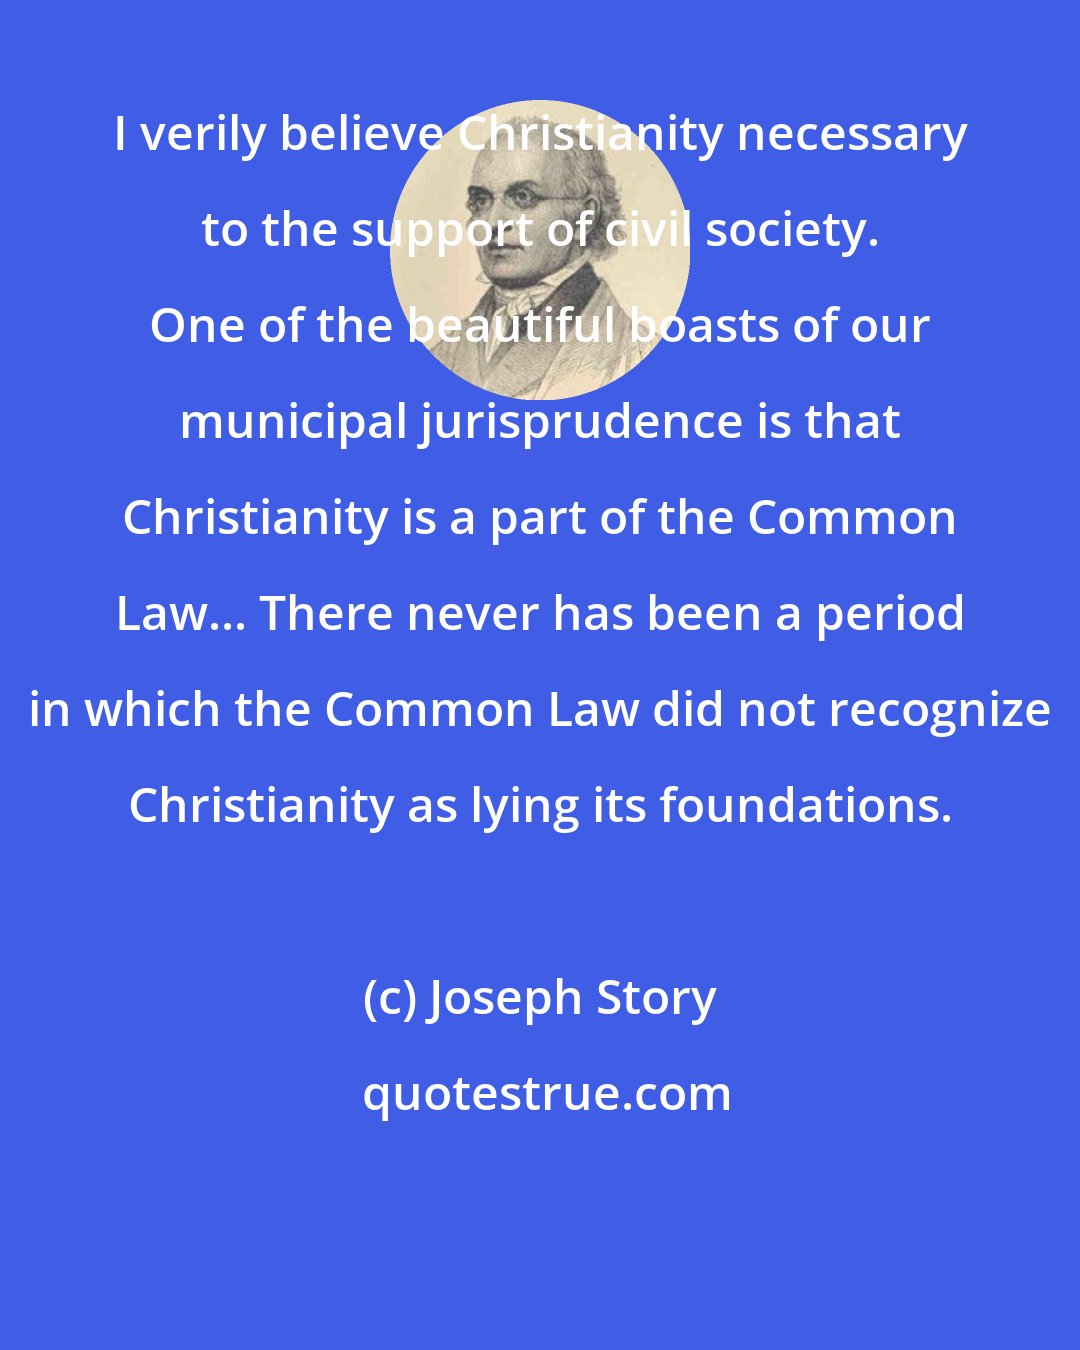 Joseph Story: I verily believe Christianity necessary to the support of civil society. One of the beautiful boasts of our municipal jurisprudence is that Christianity is a part of the Common Law... There never has been a period in which the Common Law did not recognize Christianity as lying its foundations.